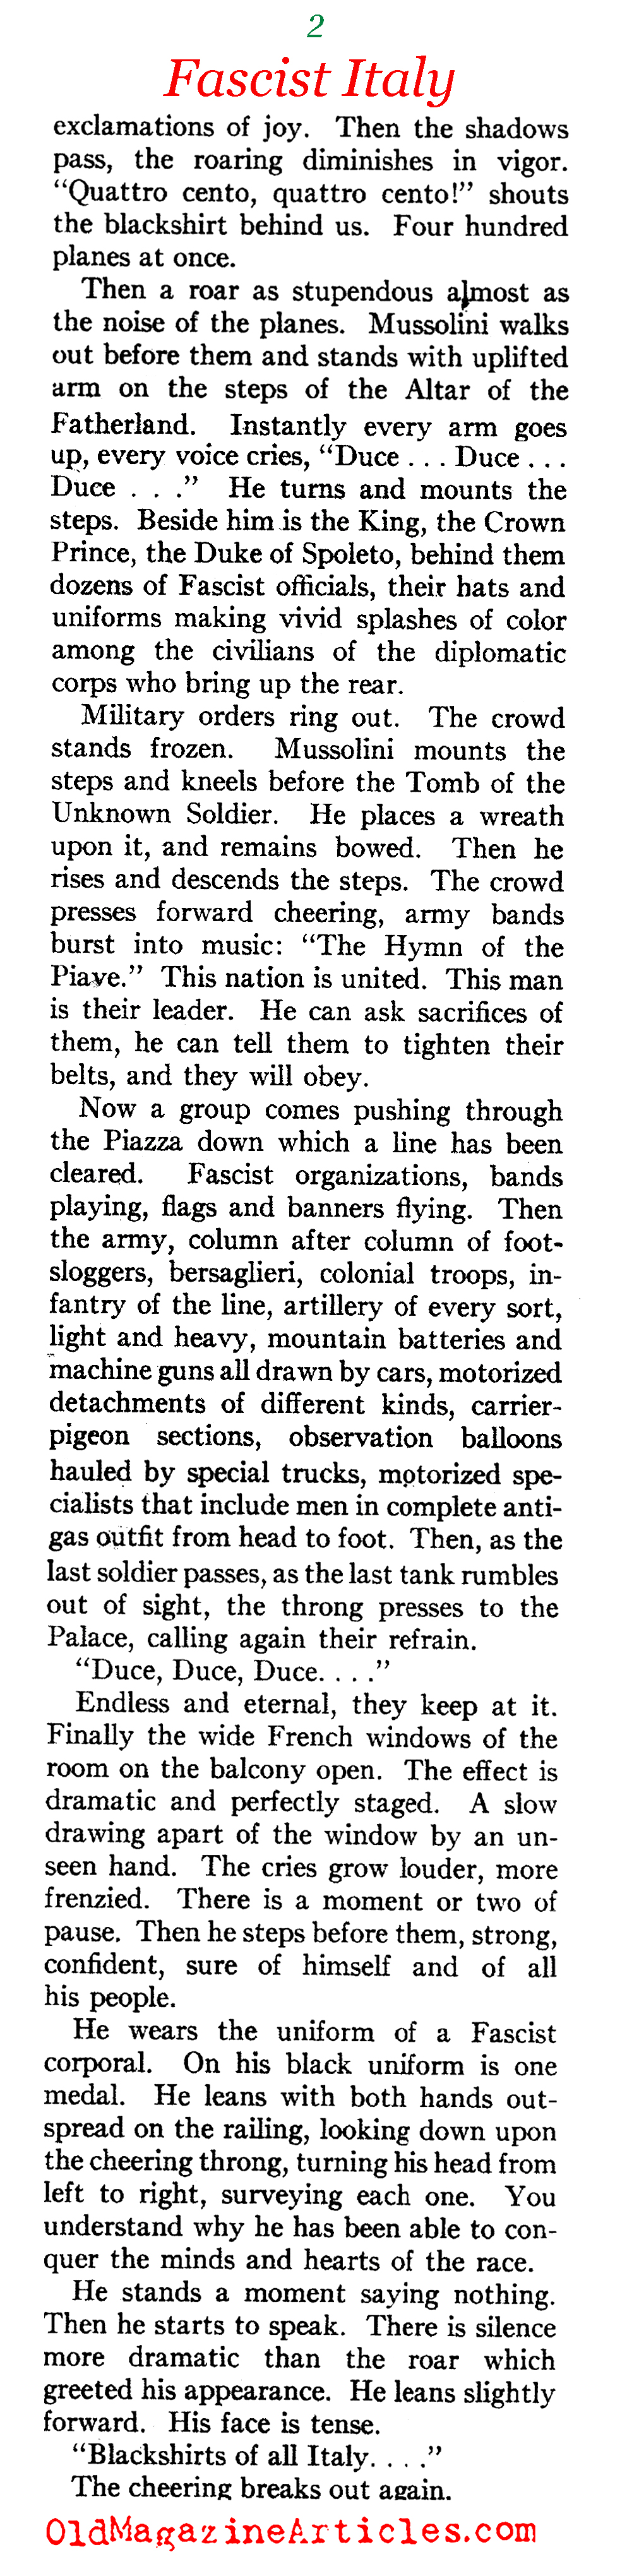 Armistice Day Mussolini Style (American Legion Monthly, 1936)